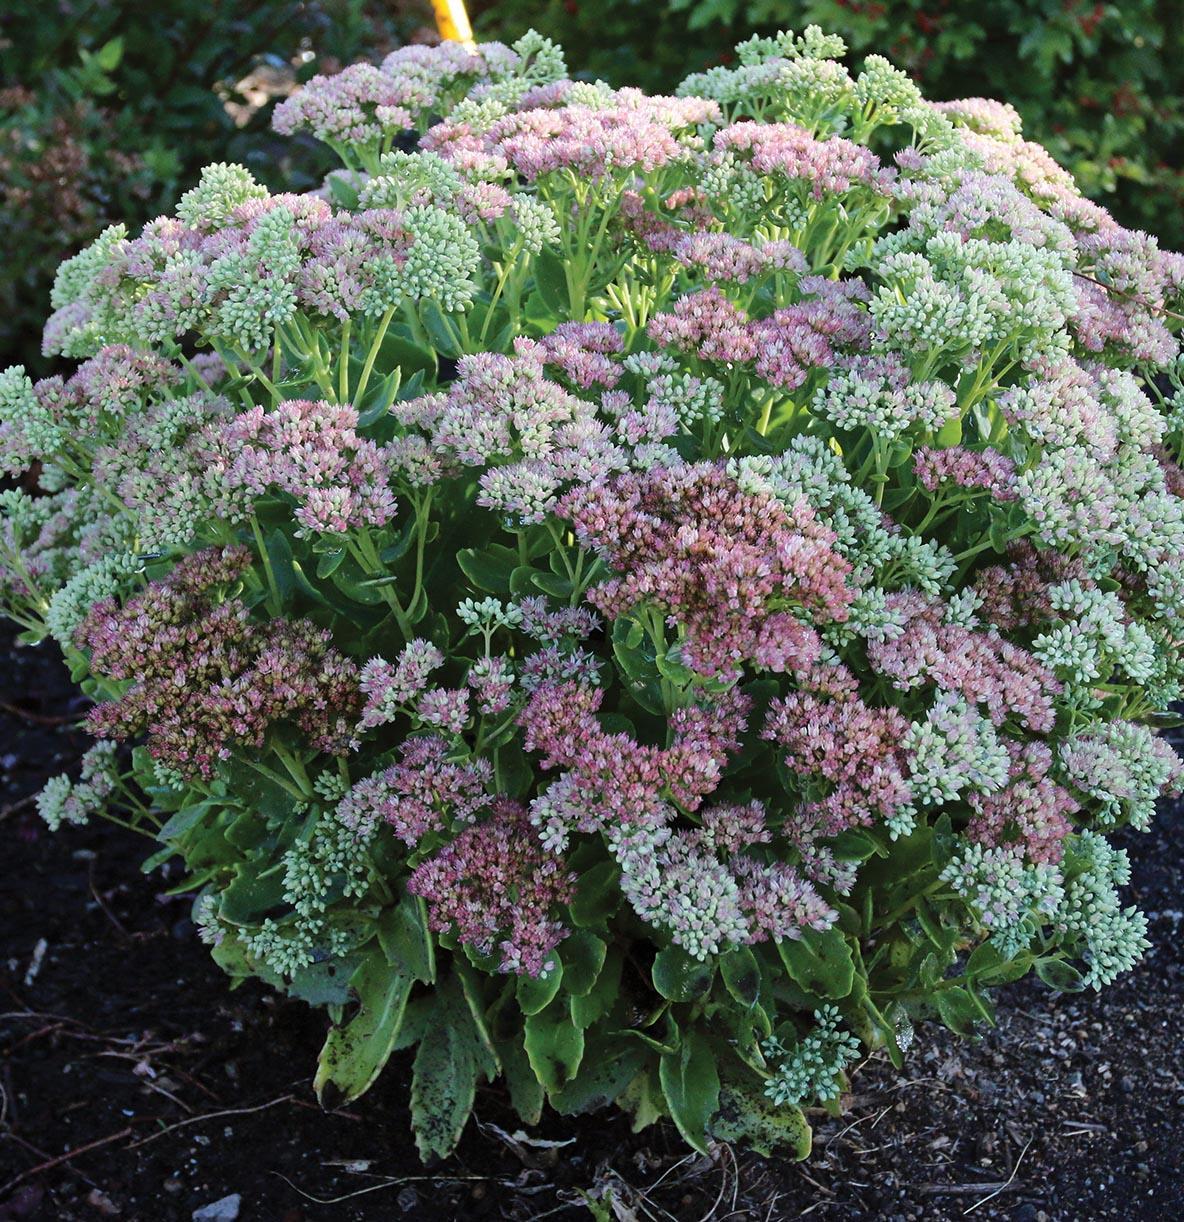 white and light pink composite flowers on light green foliage